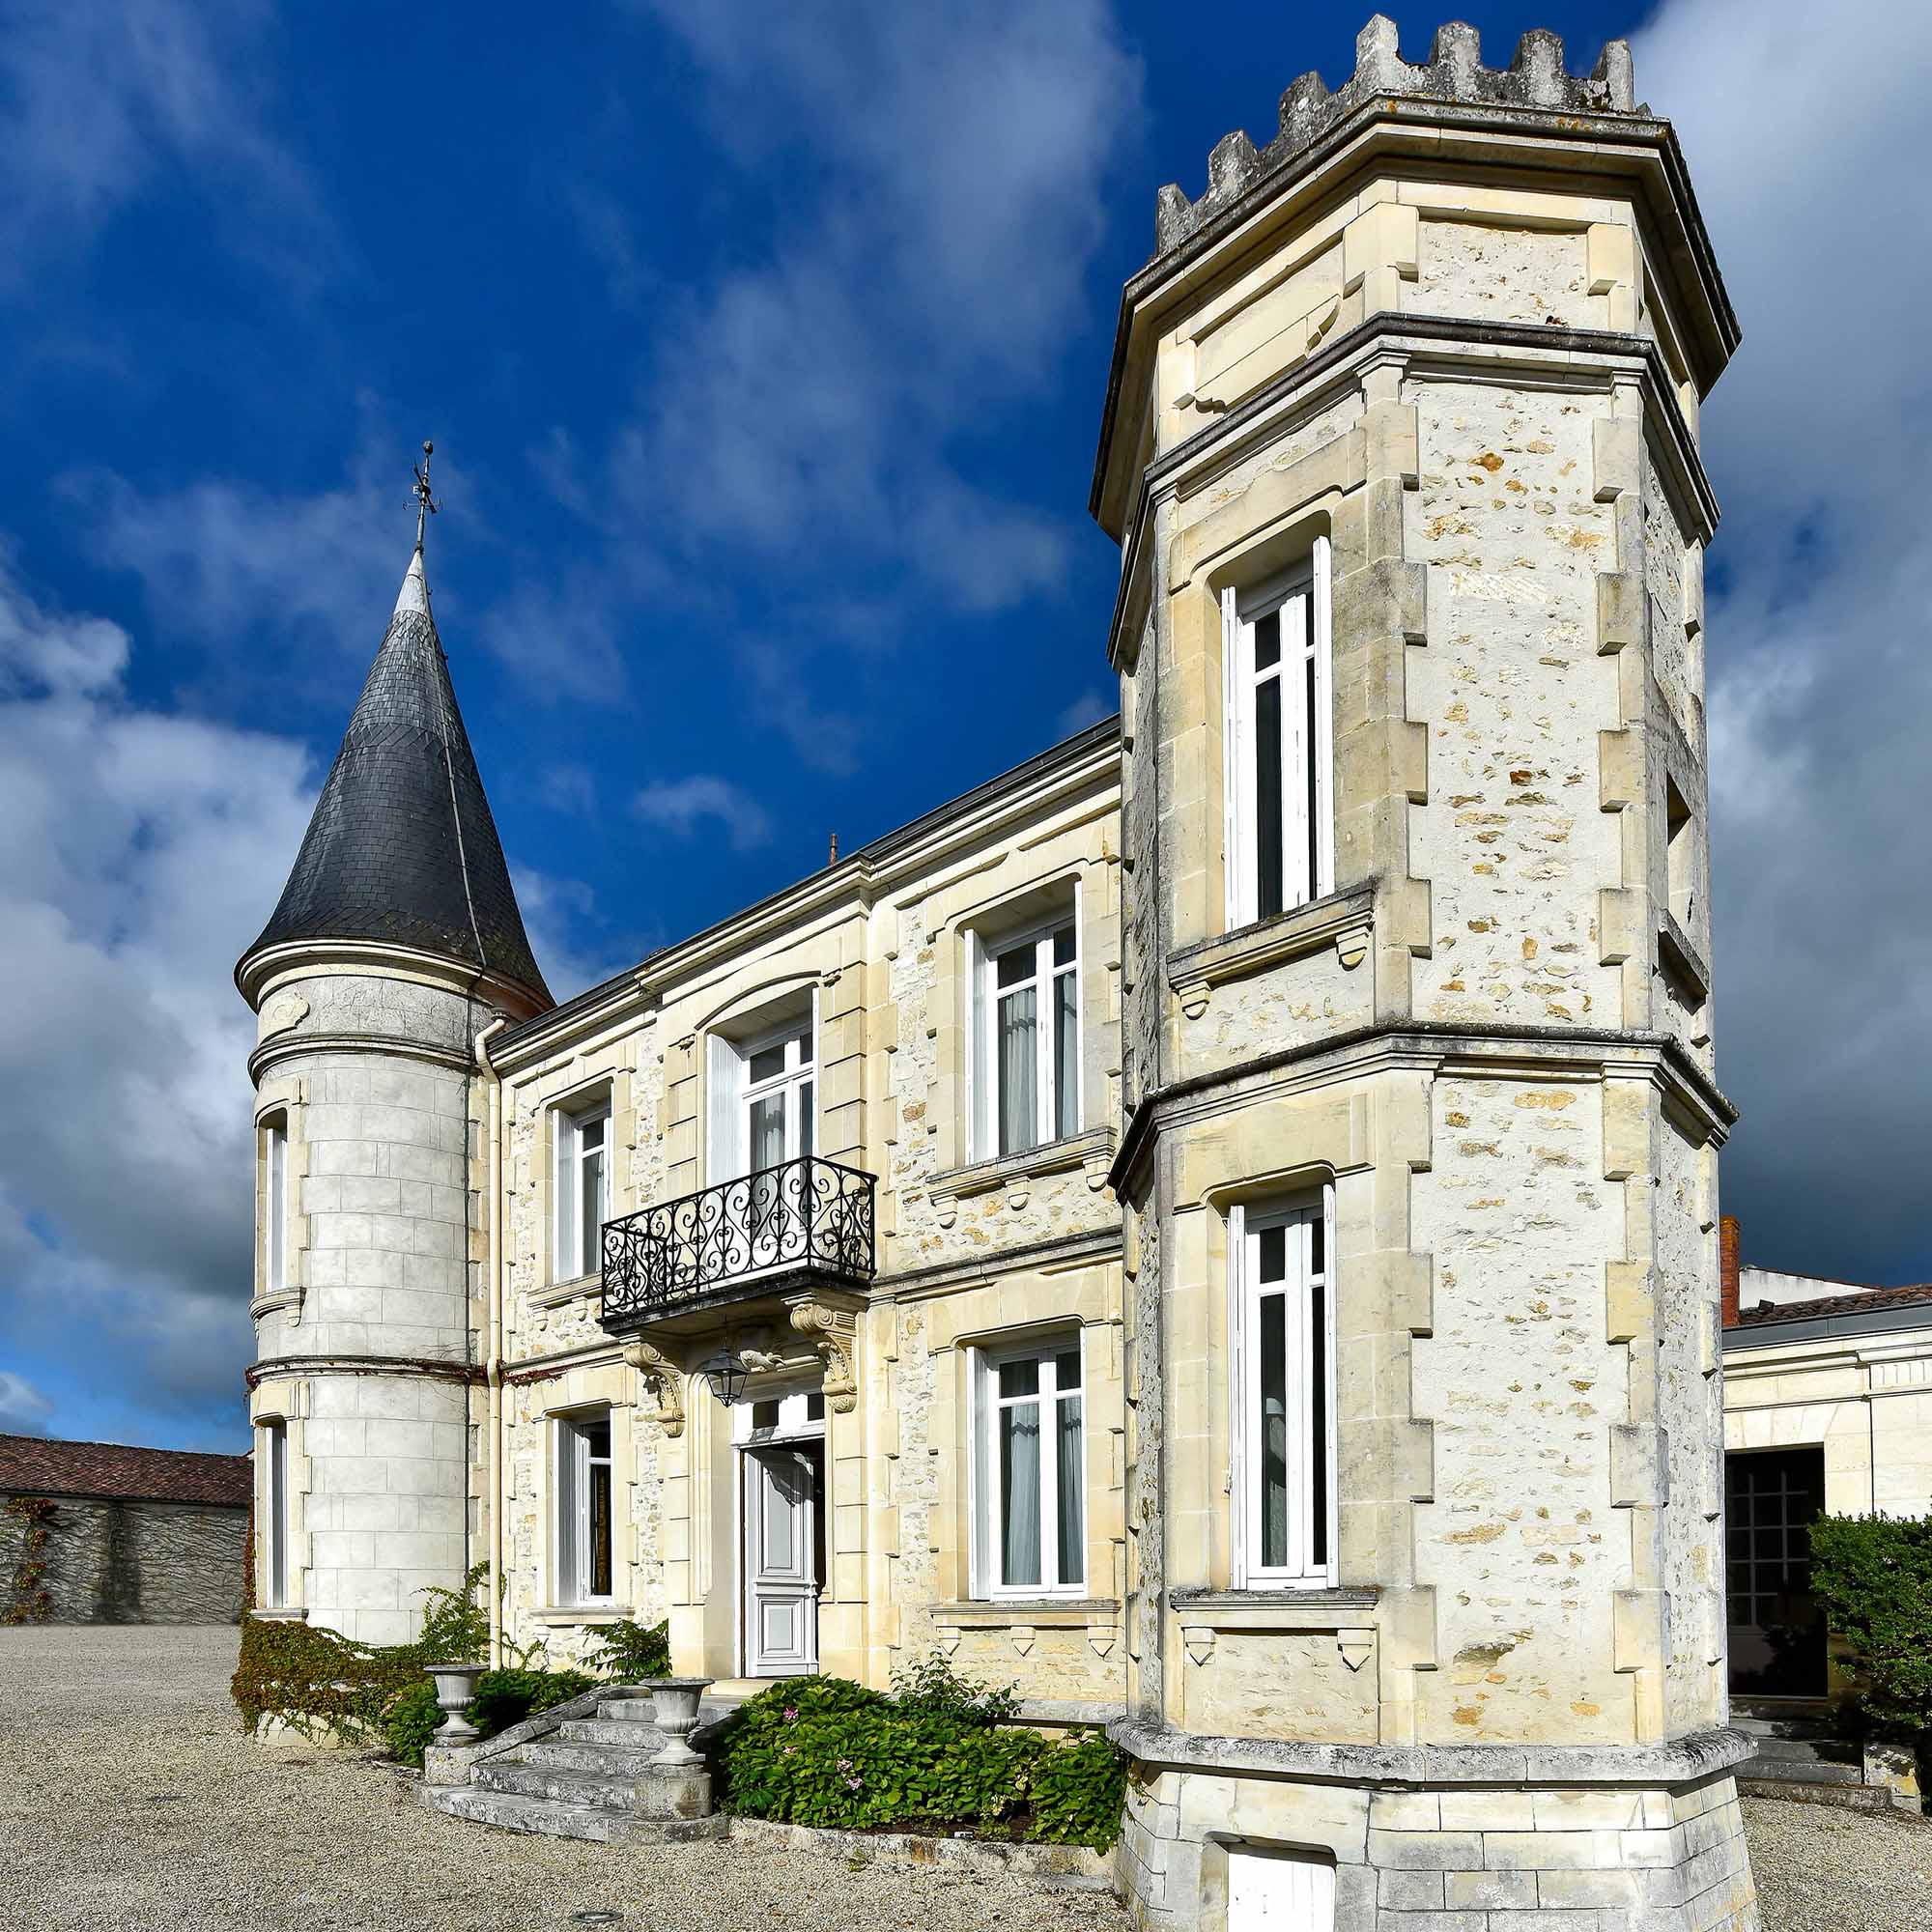 STAY AT THE CHATEAU DU PLESSIS - IMMERSION - CAMUS COGNAC